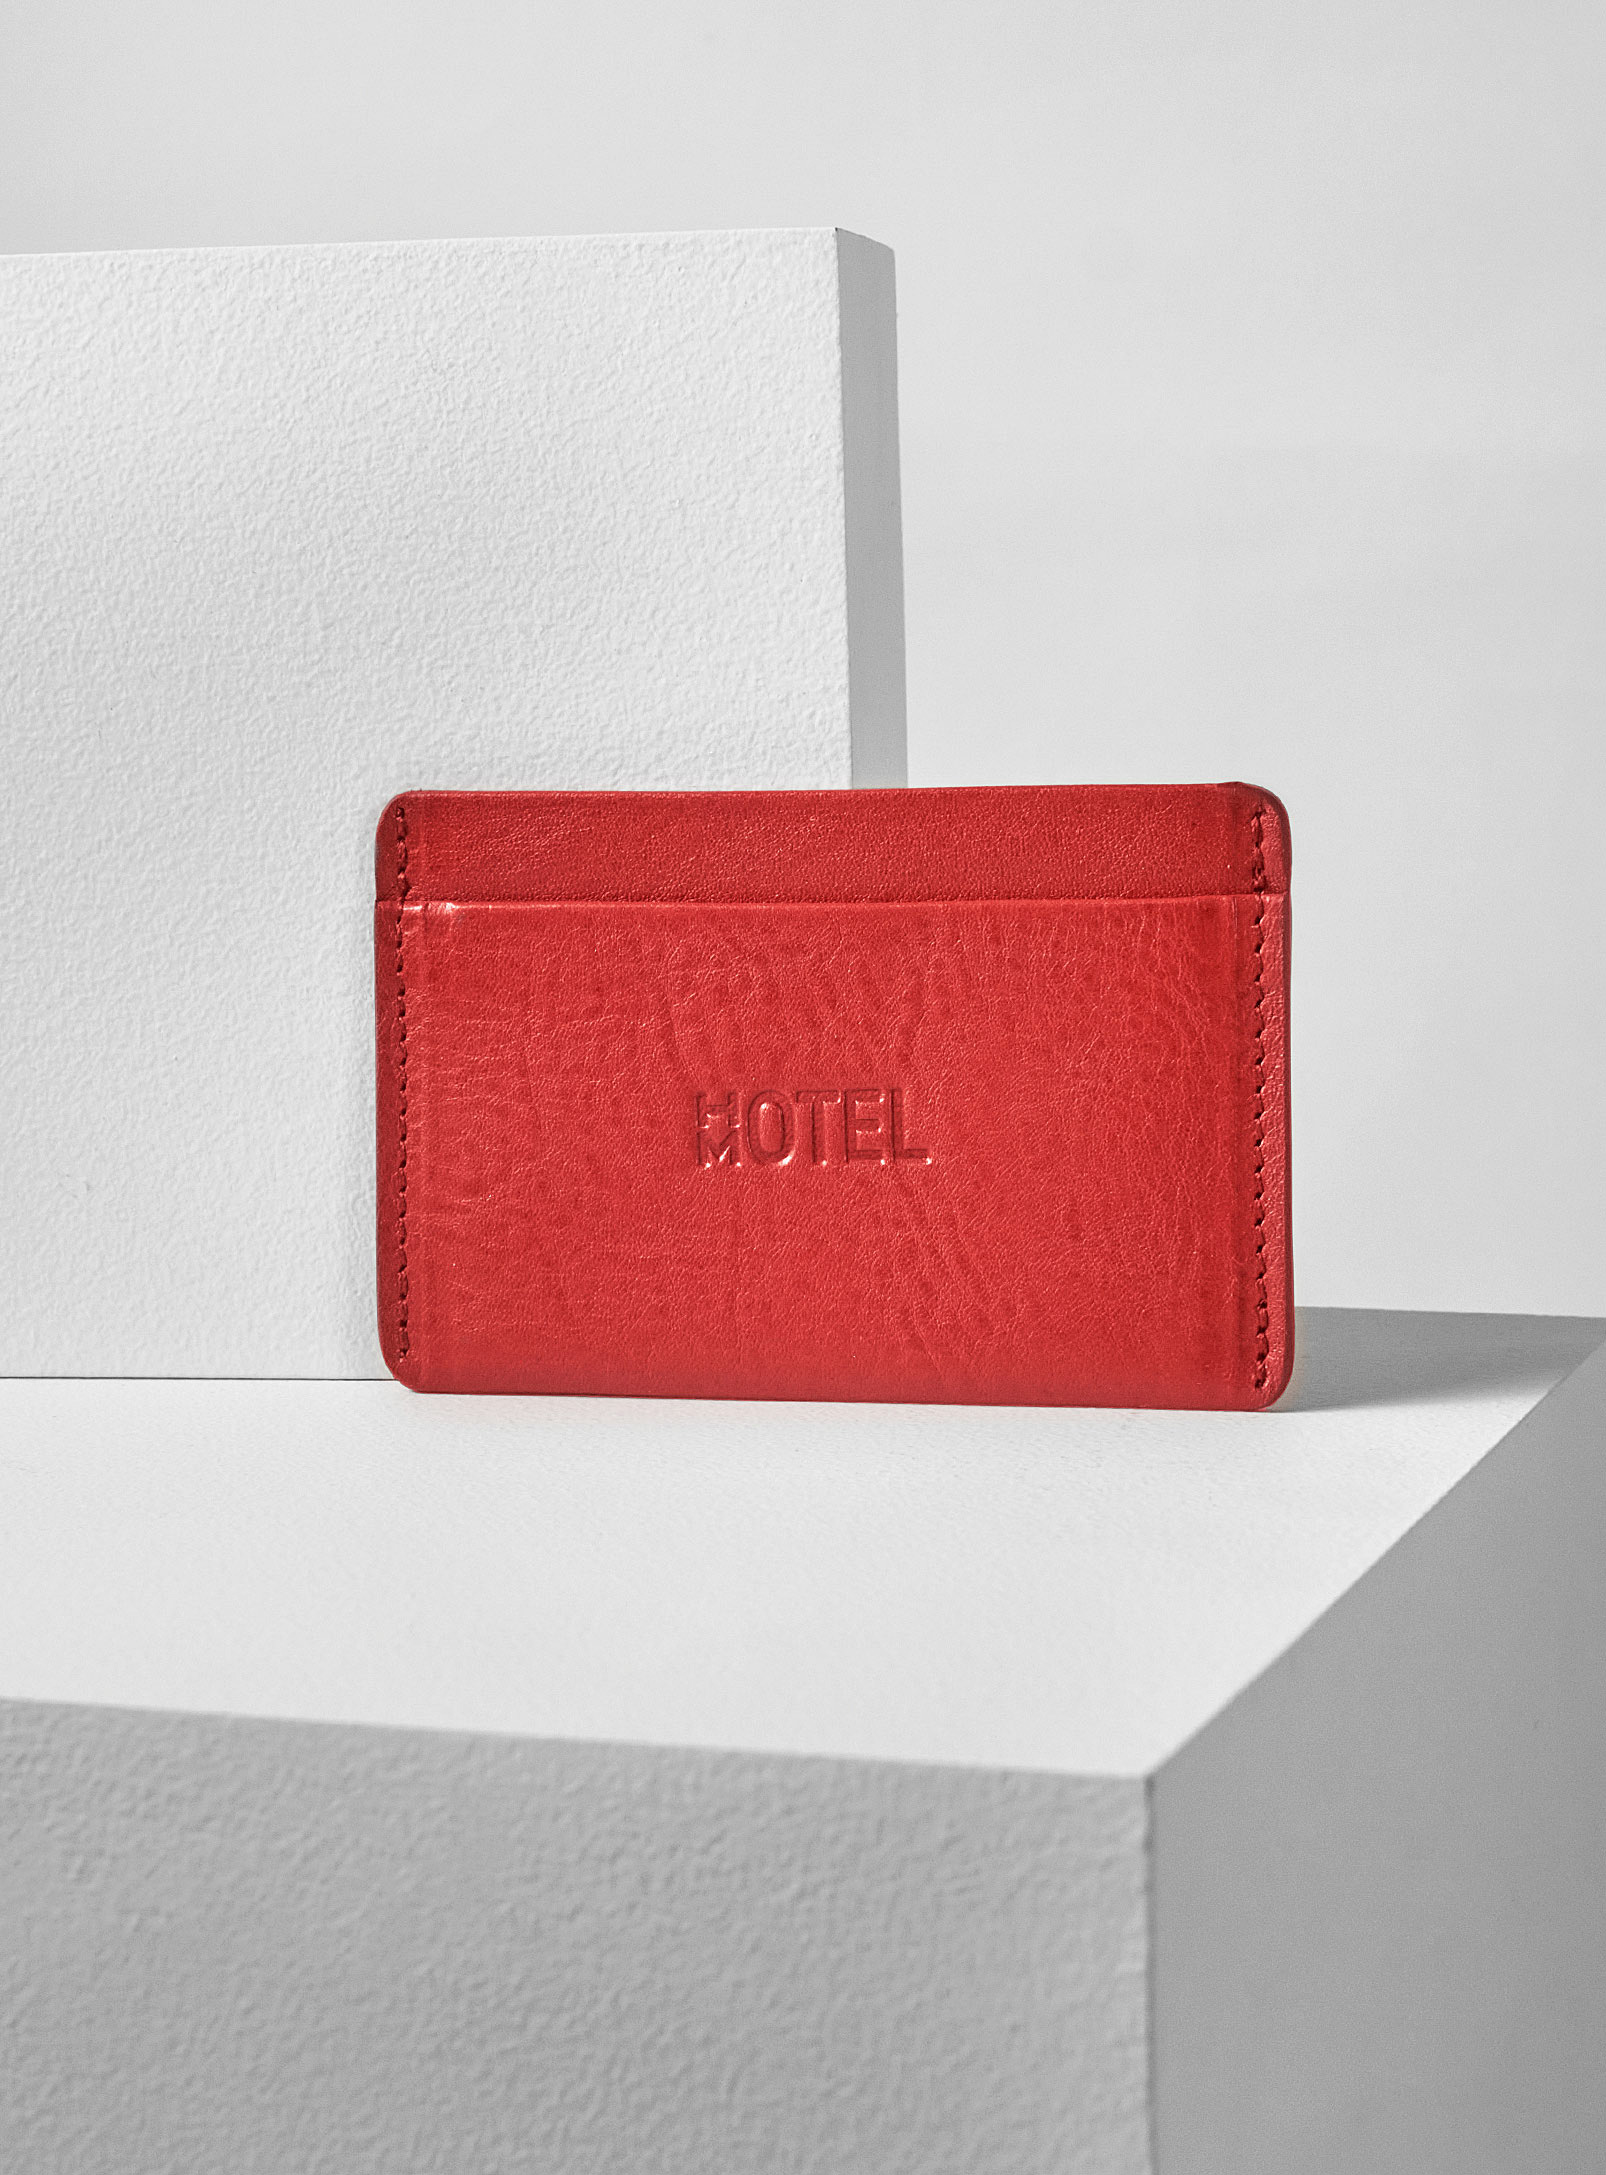 Hotelmotel Minimalist Leather Card Holder In Red